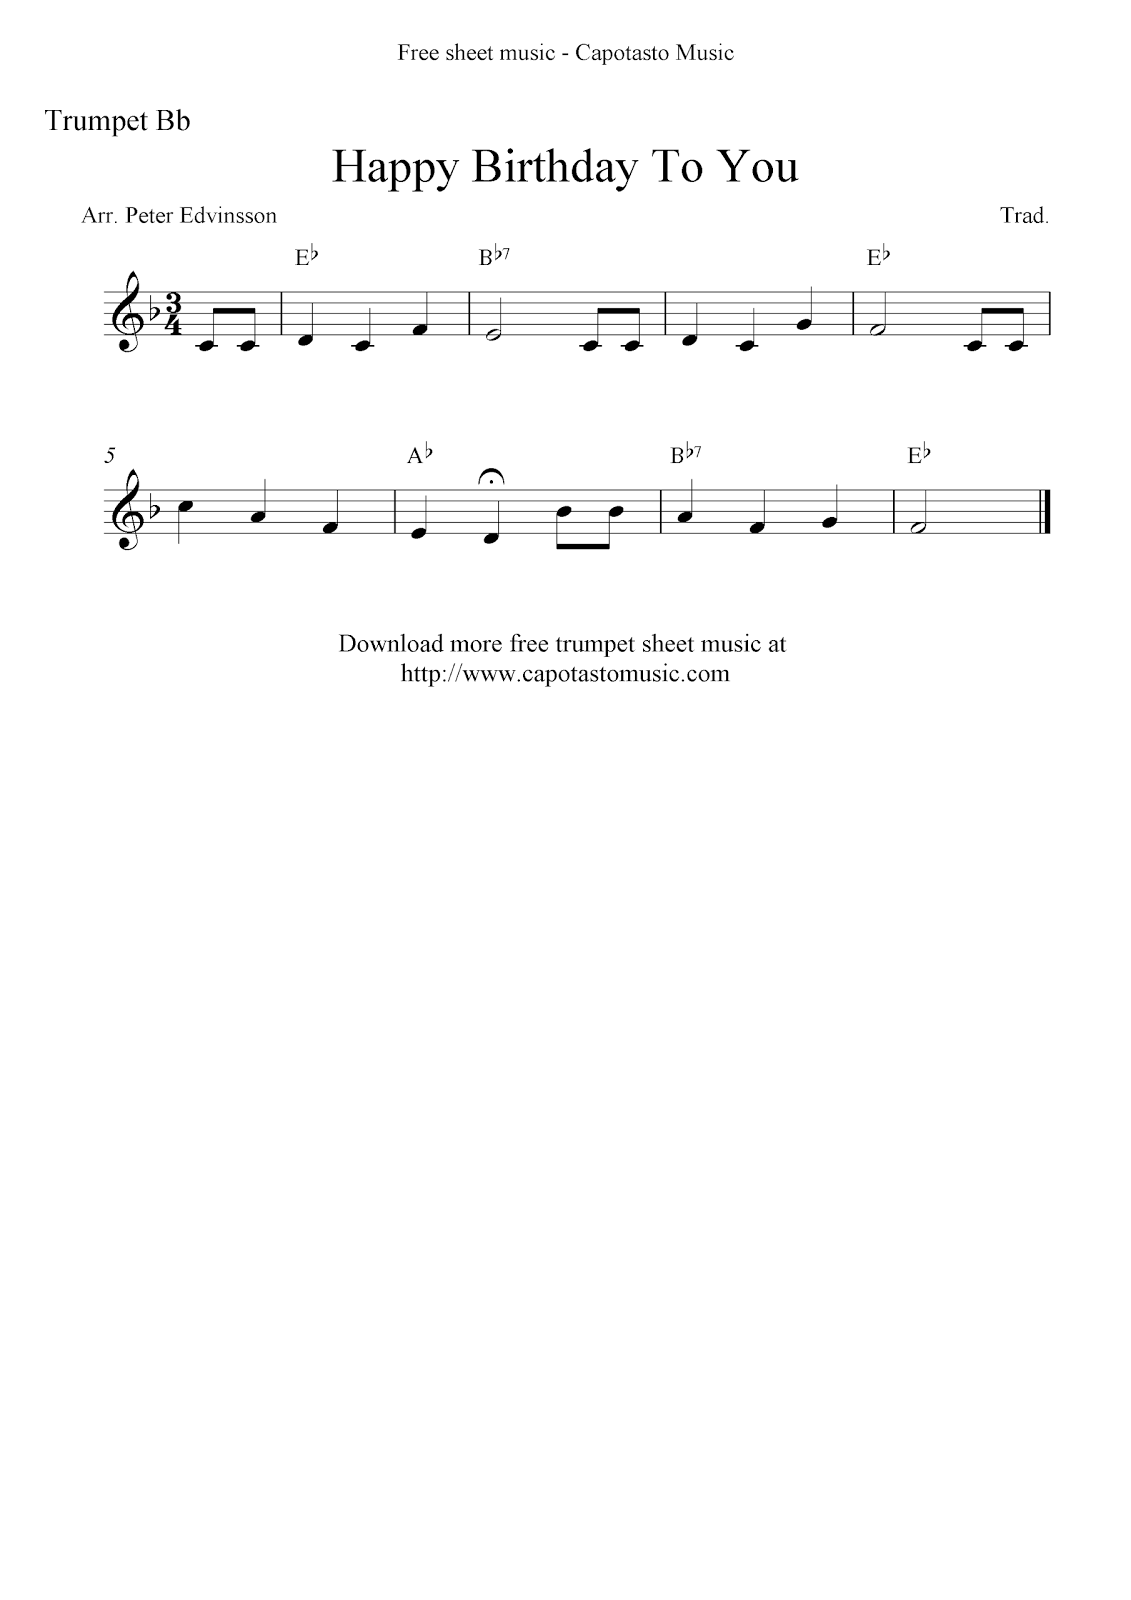 Happy Birthday To You Free Trumpet Sheet Music Notes